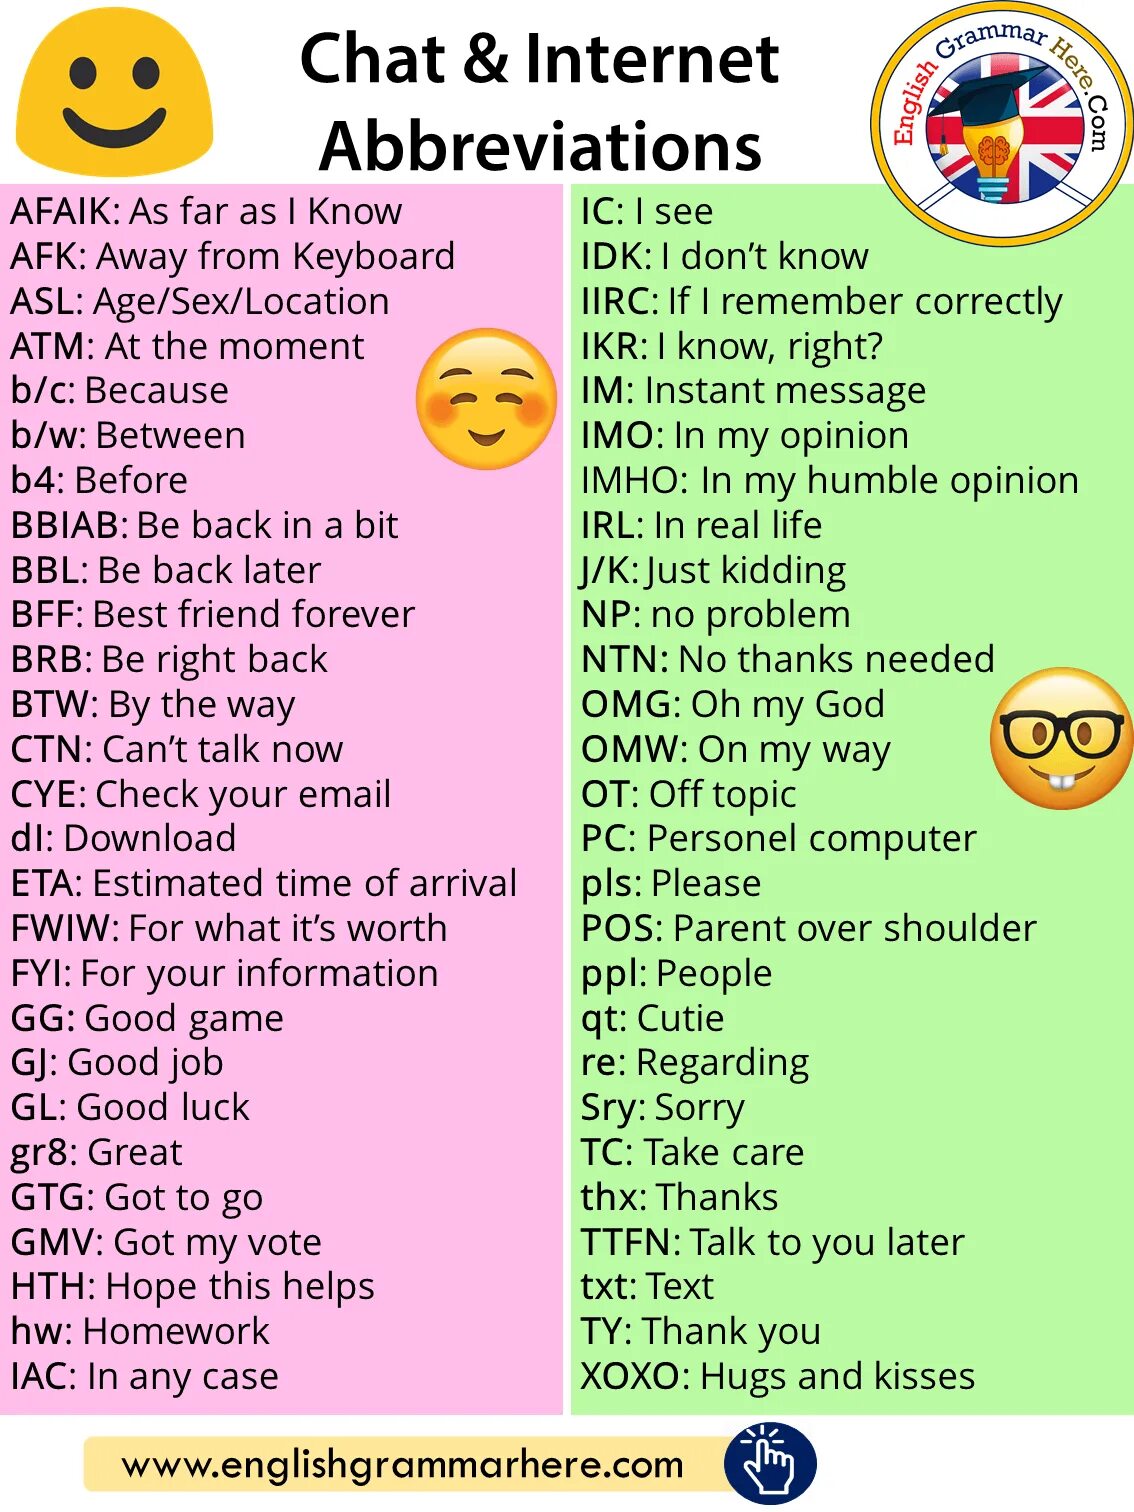 Can chat in this. Internet abbreviations. Abbreviations in English список. Internet сленг английский. Abbreviations and Acronyms in English.